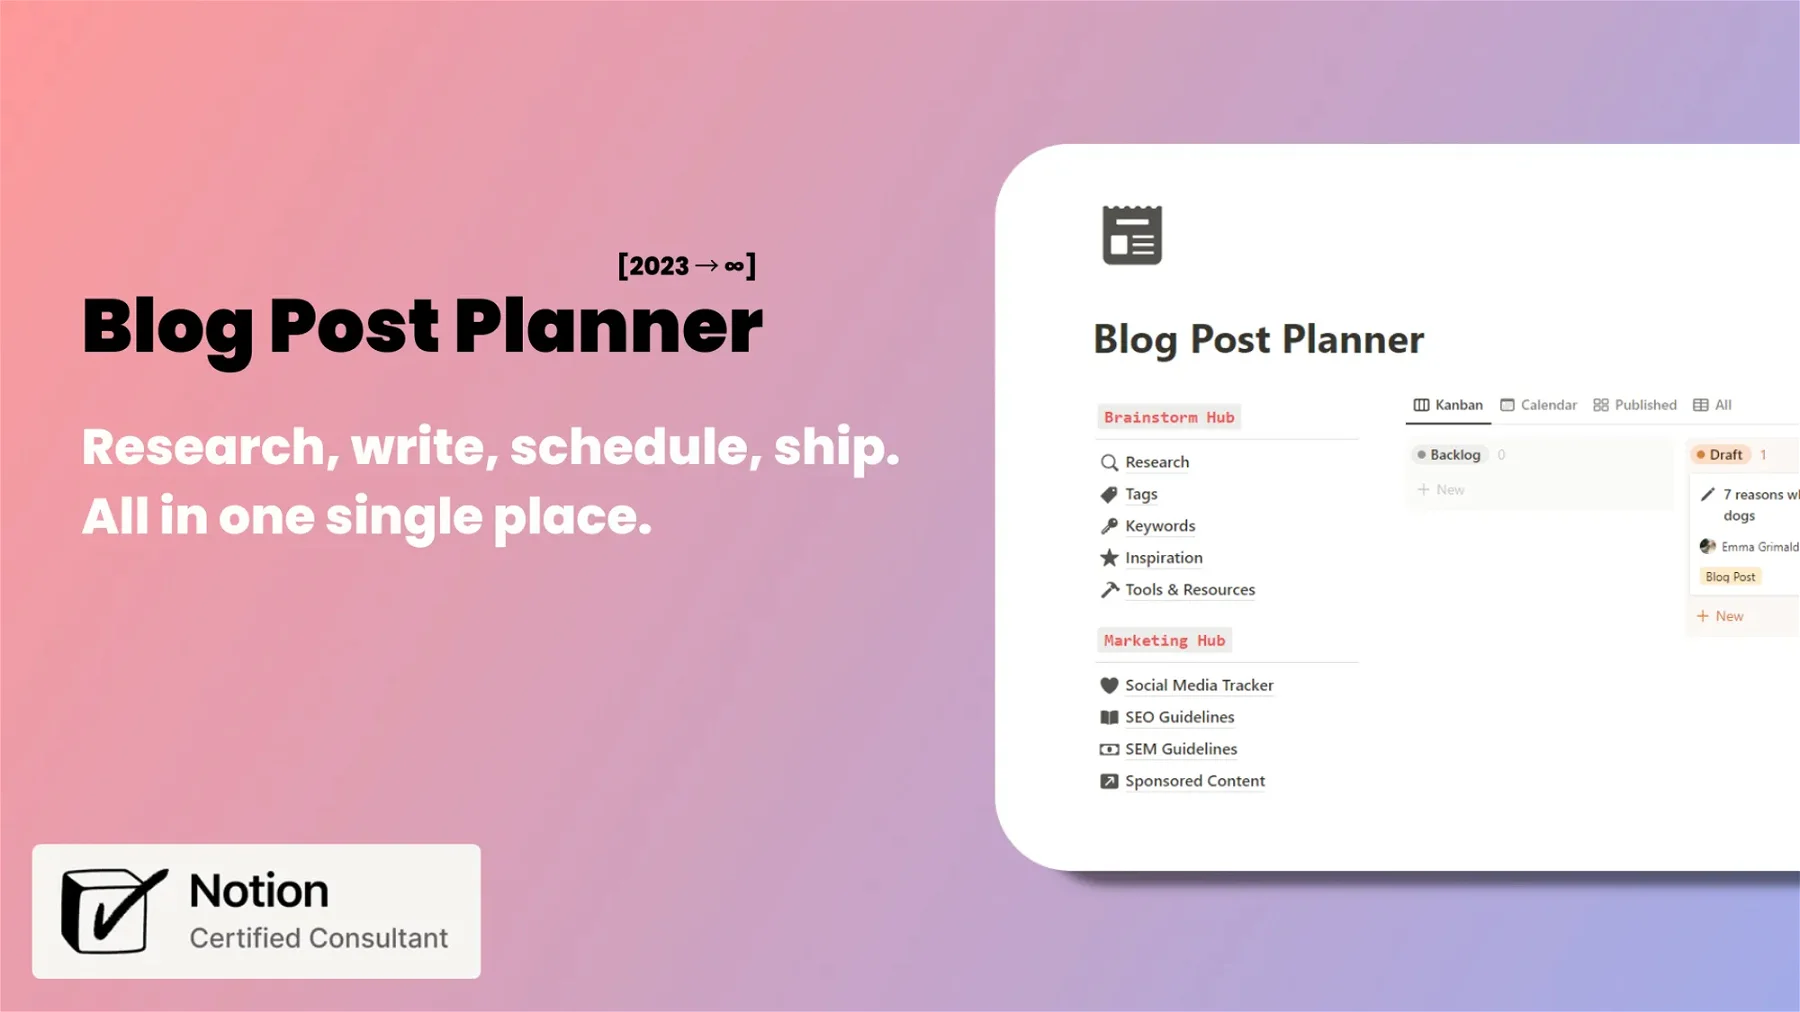 Blog Post Planner [Notion Template]